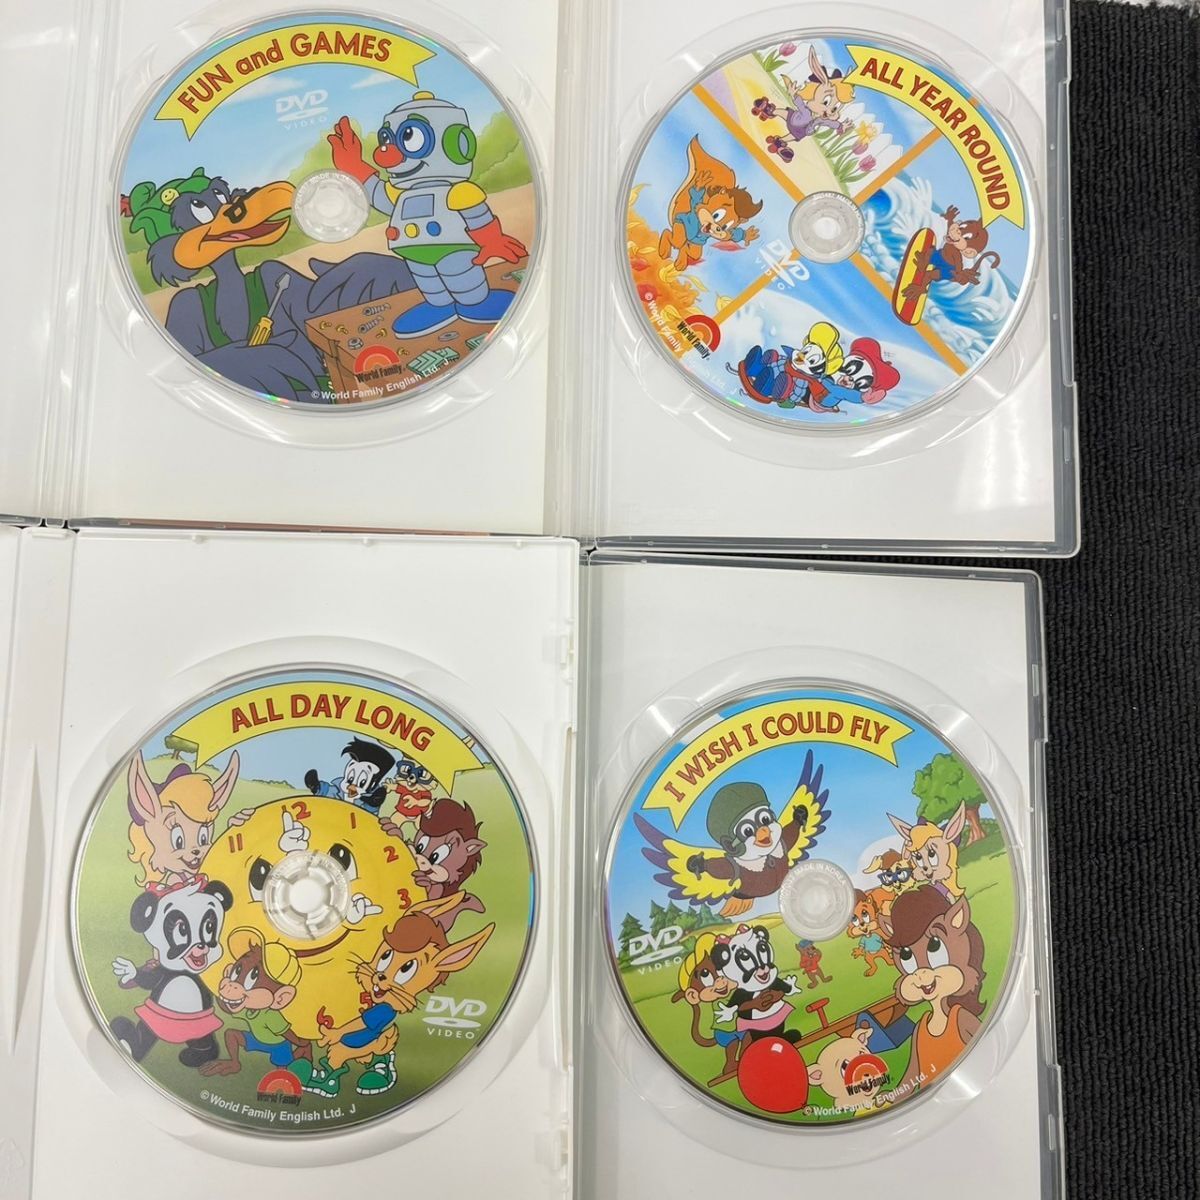 W205-C4-1477 world family world Family English DVD 12 pieces set summarize Zippy ABC*s/ALL ABOUT ME/FUN and GAMES other ③